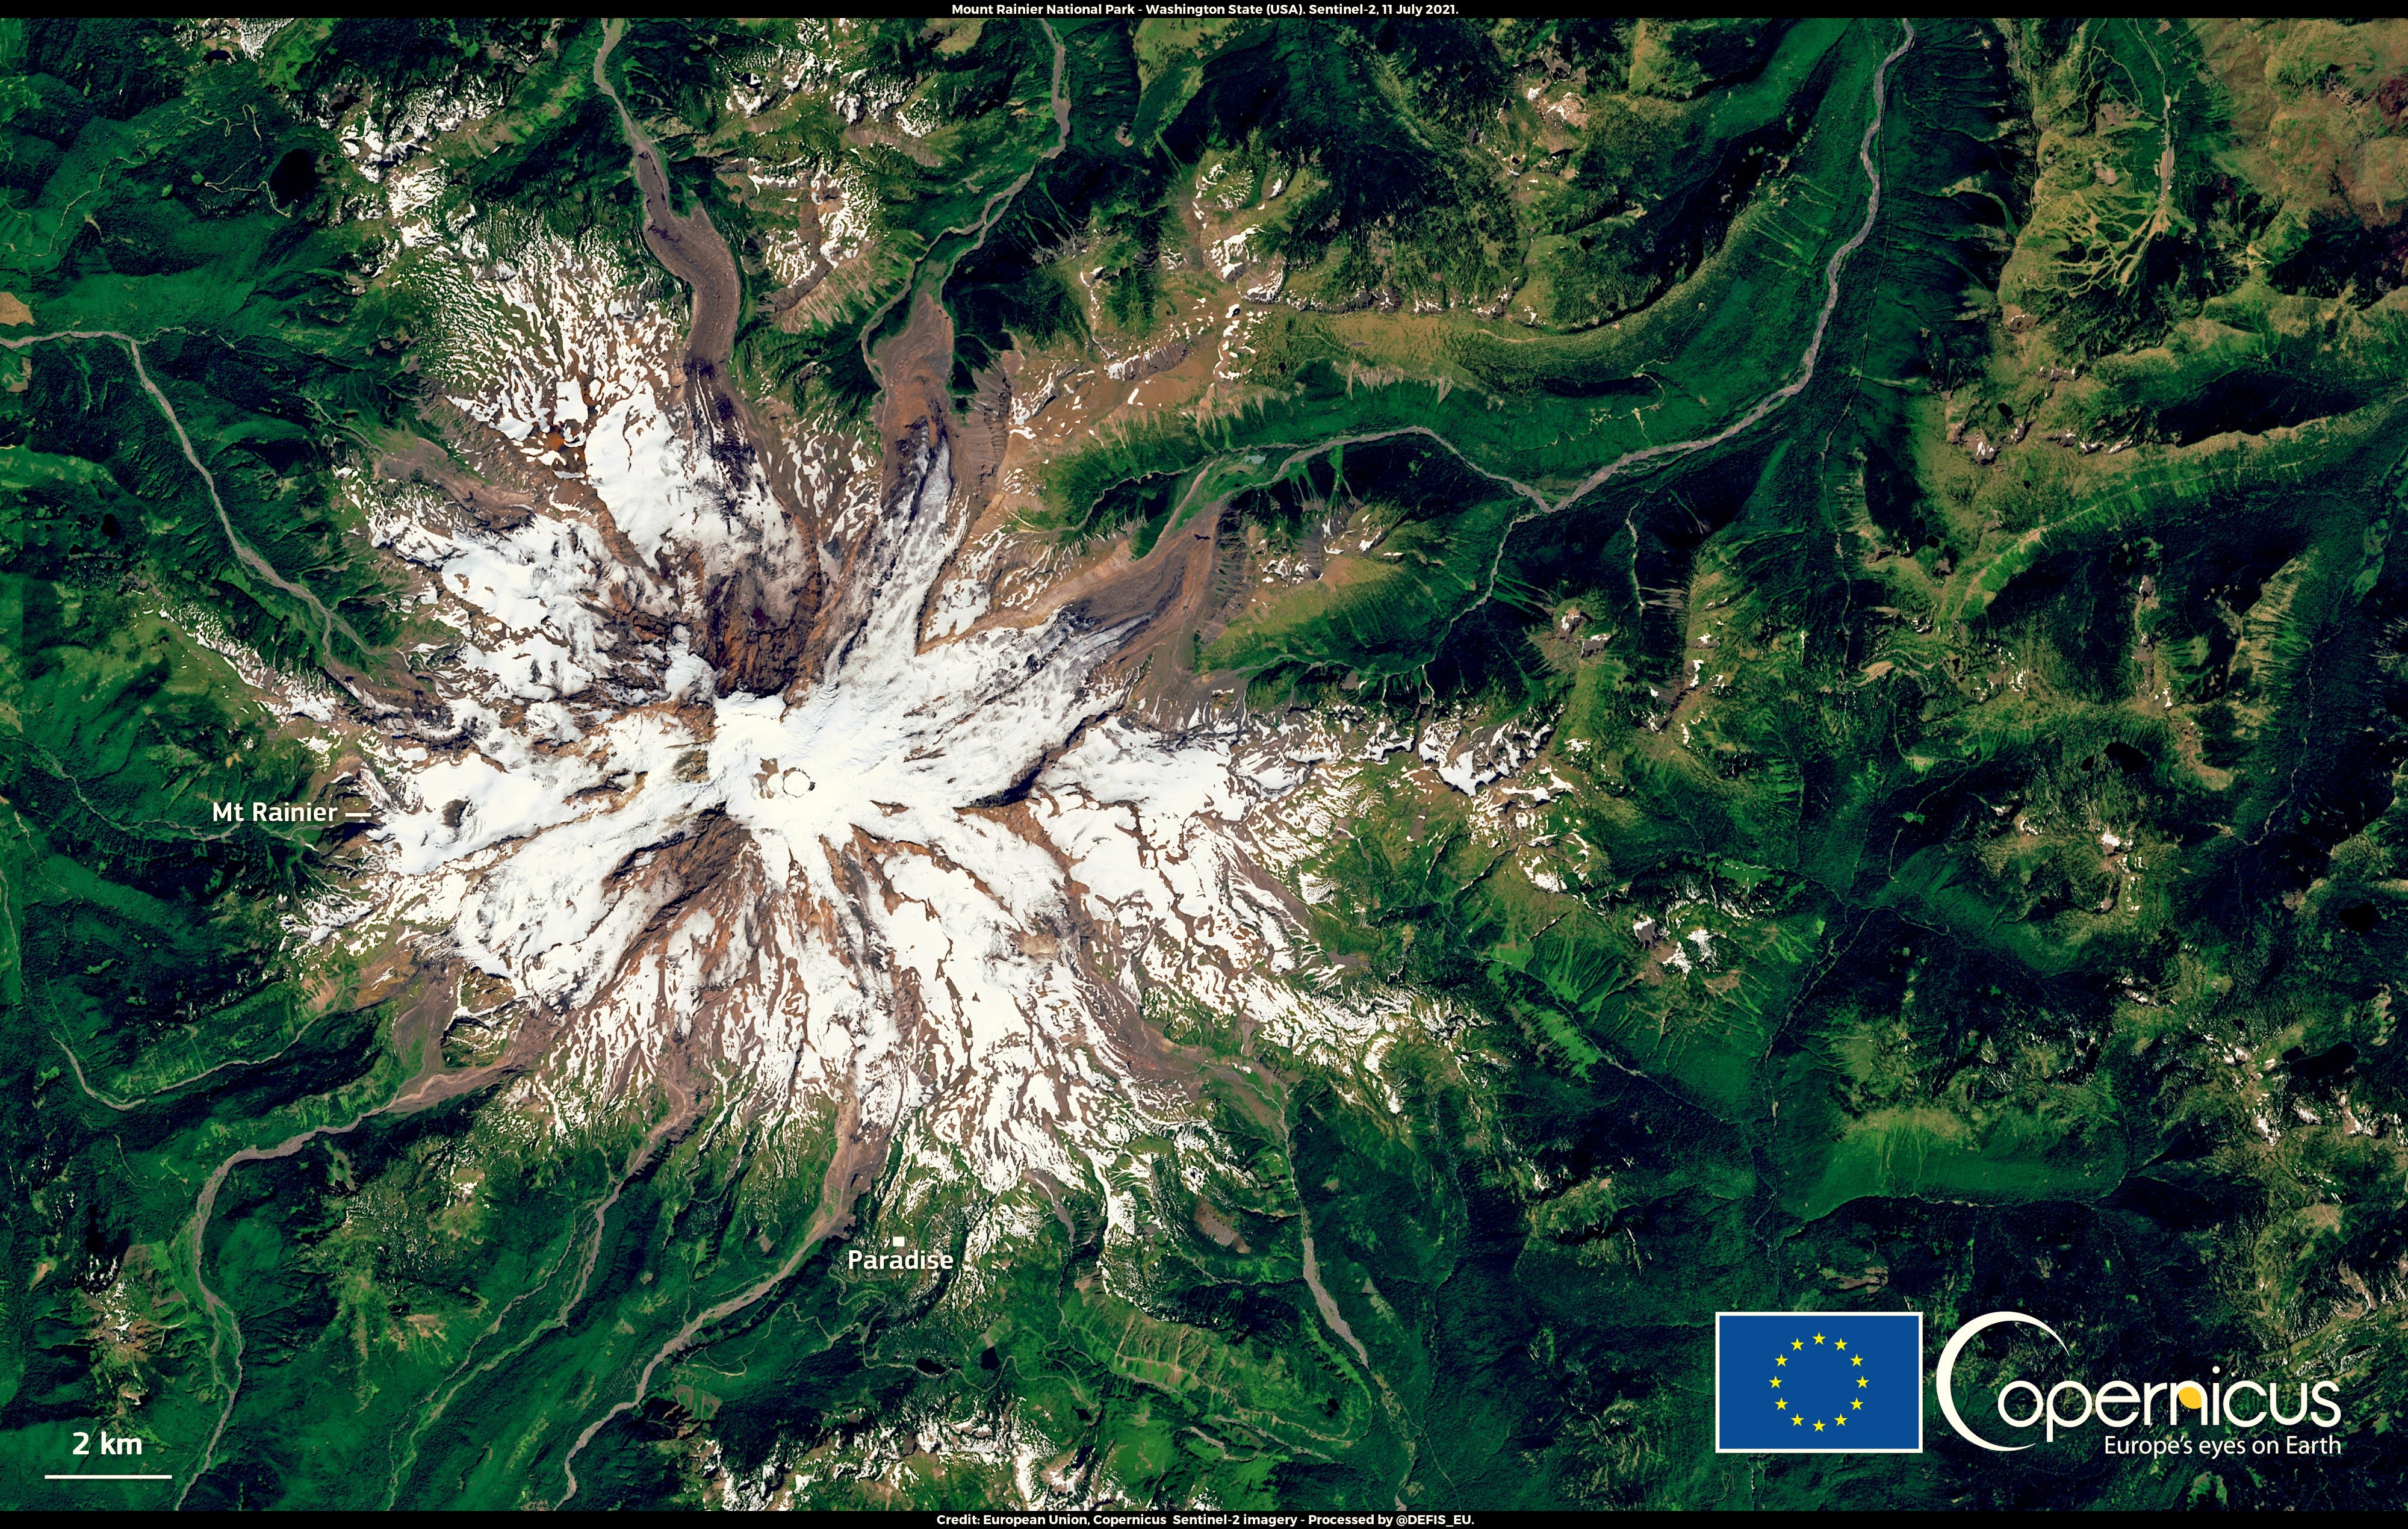 This satellite image, from 11 July 2021, shows the extent of the snow melt at Mount Rainier National Park in Washington state